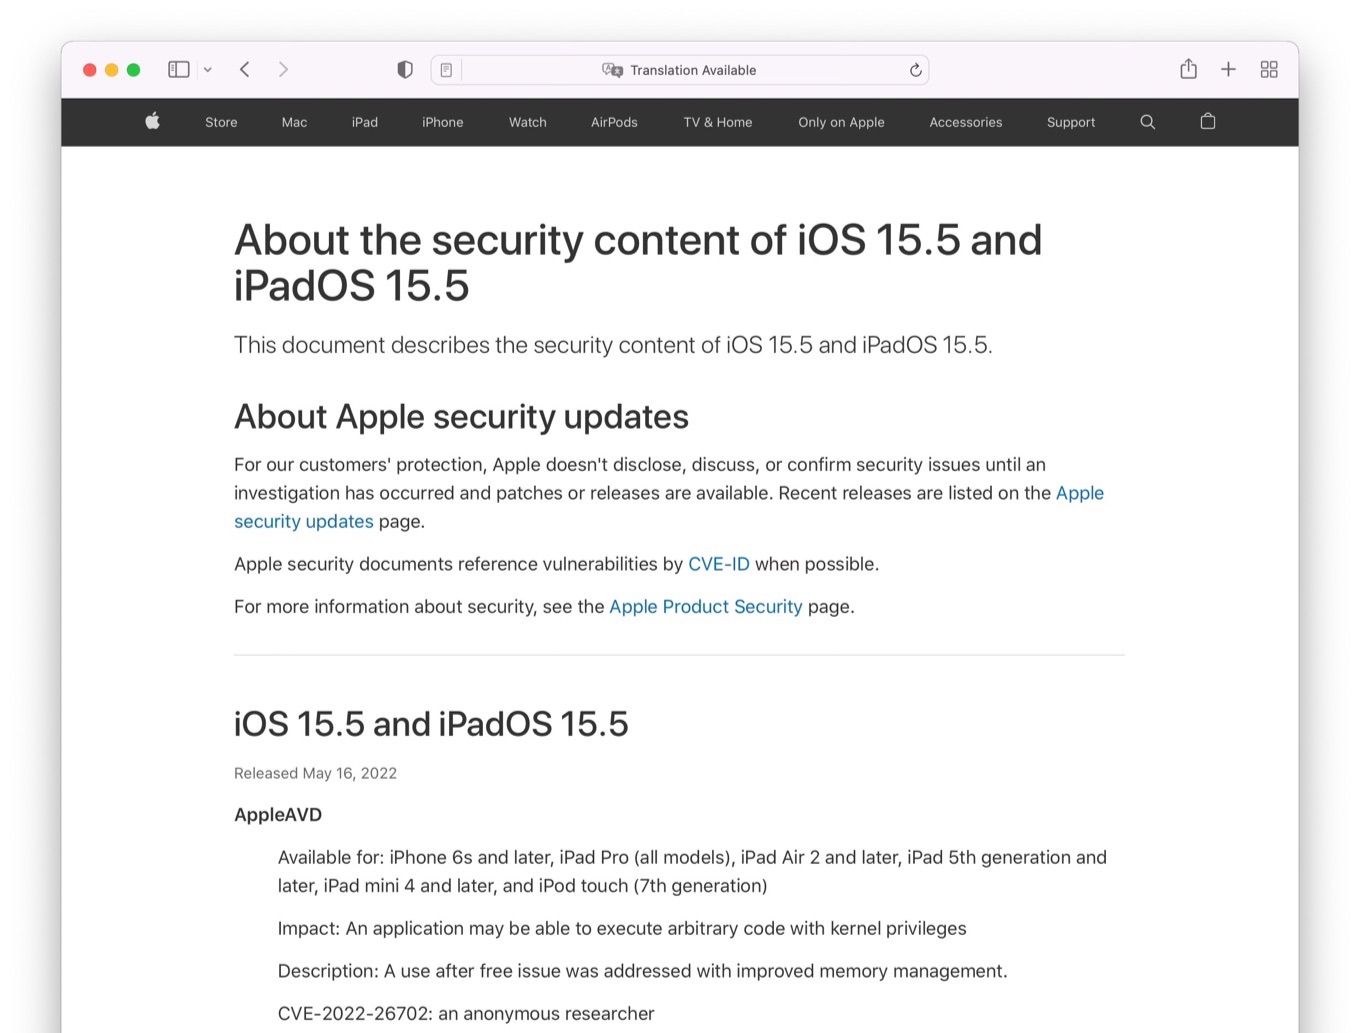 About the security content of iOS 15.5 and iPadOS 15.5